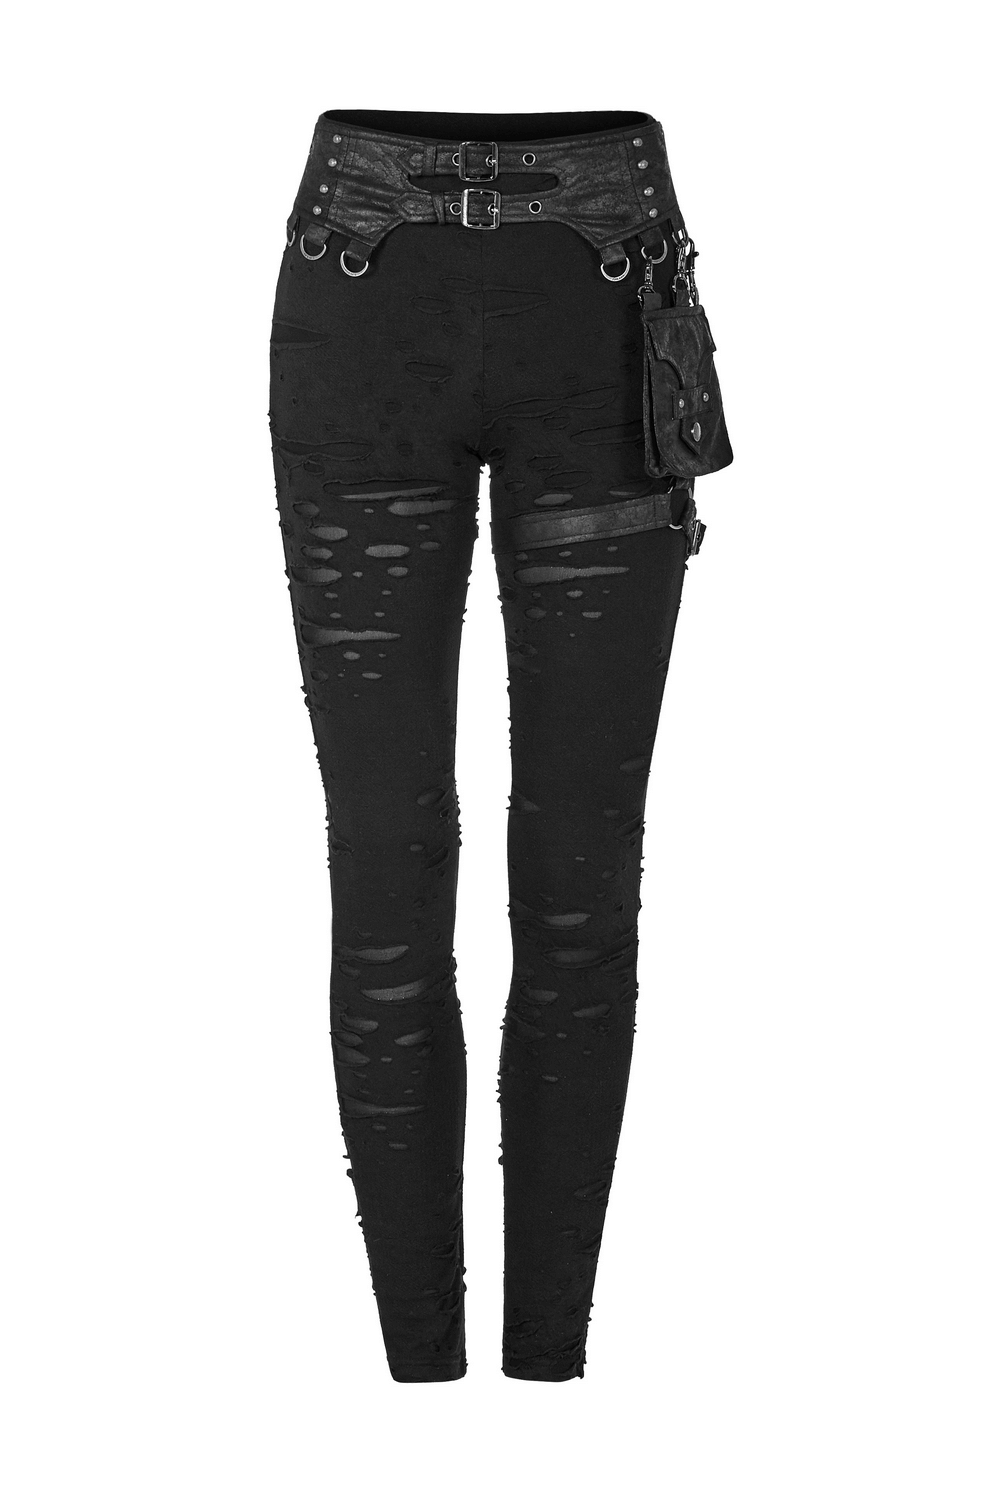 Gothic Ripped Skinny Leggings with Chain Accents